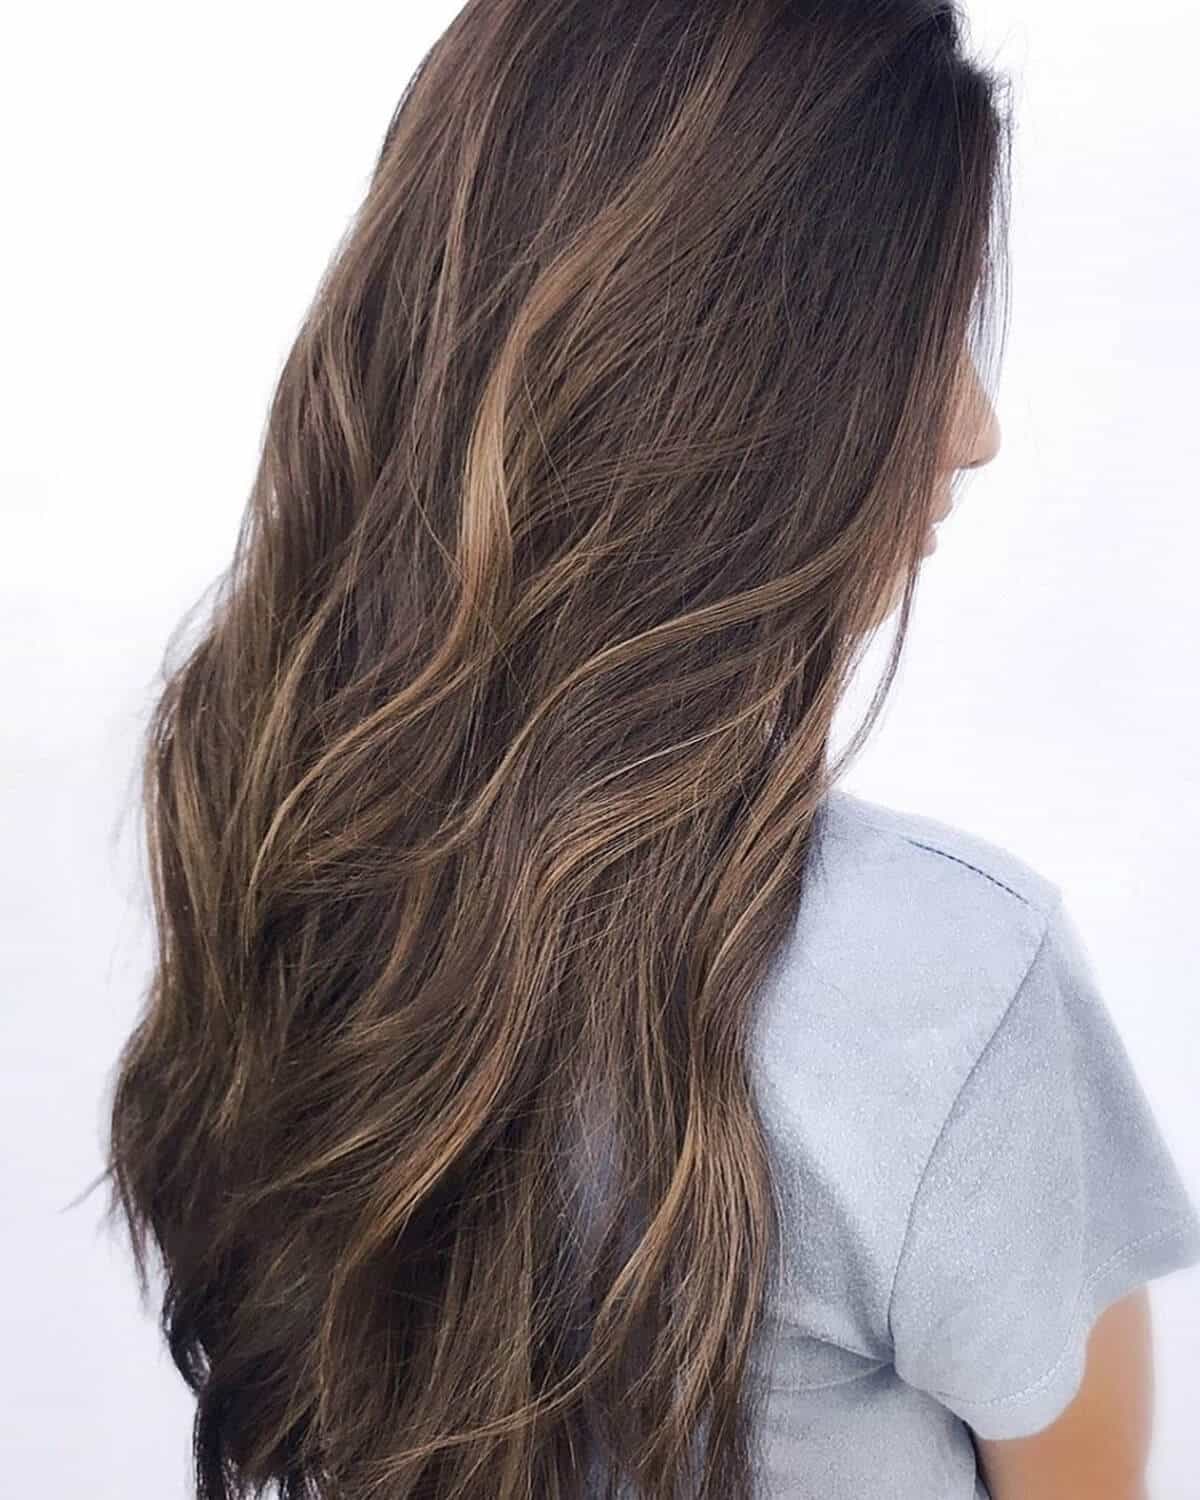 21 Amazing Ways to Get Sandy Brown Hair to Freshen-Up Your Dull Locks